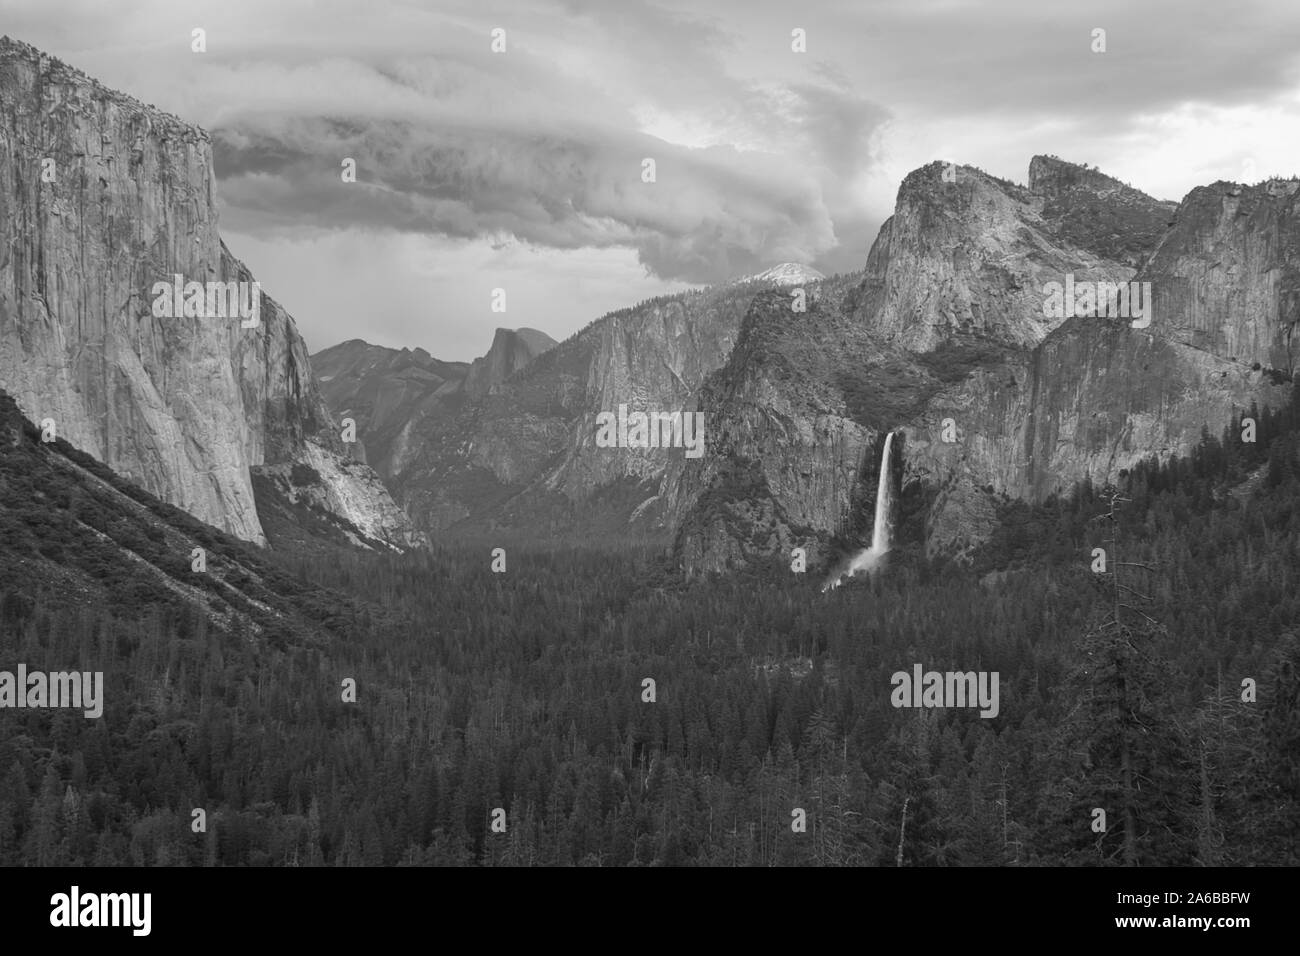 A passing thunder storm in the Yosemite Valley Stock Photo